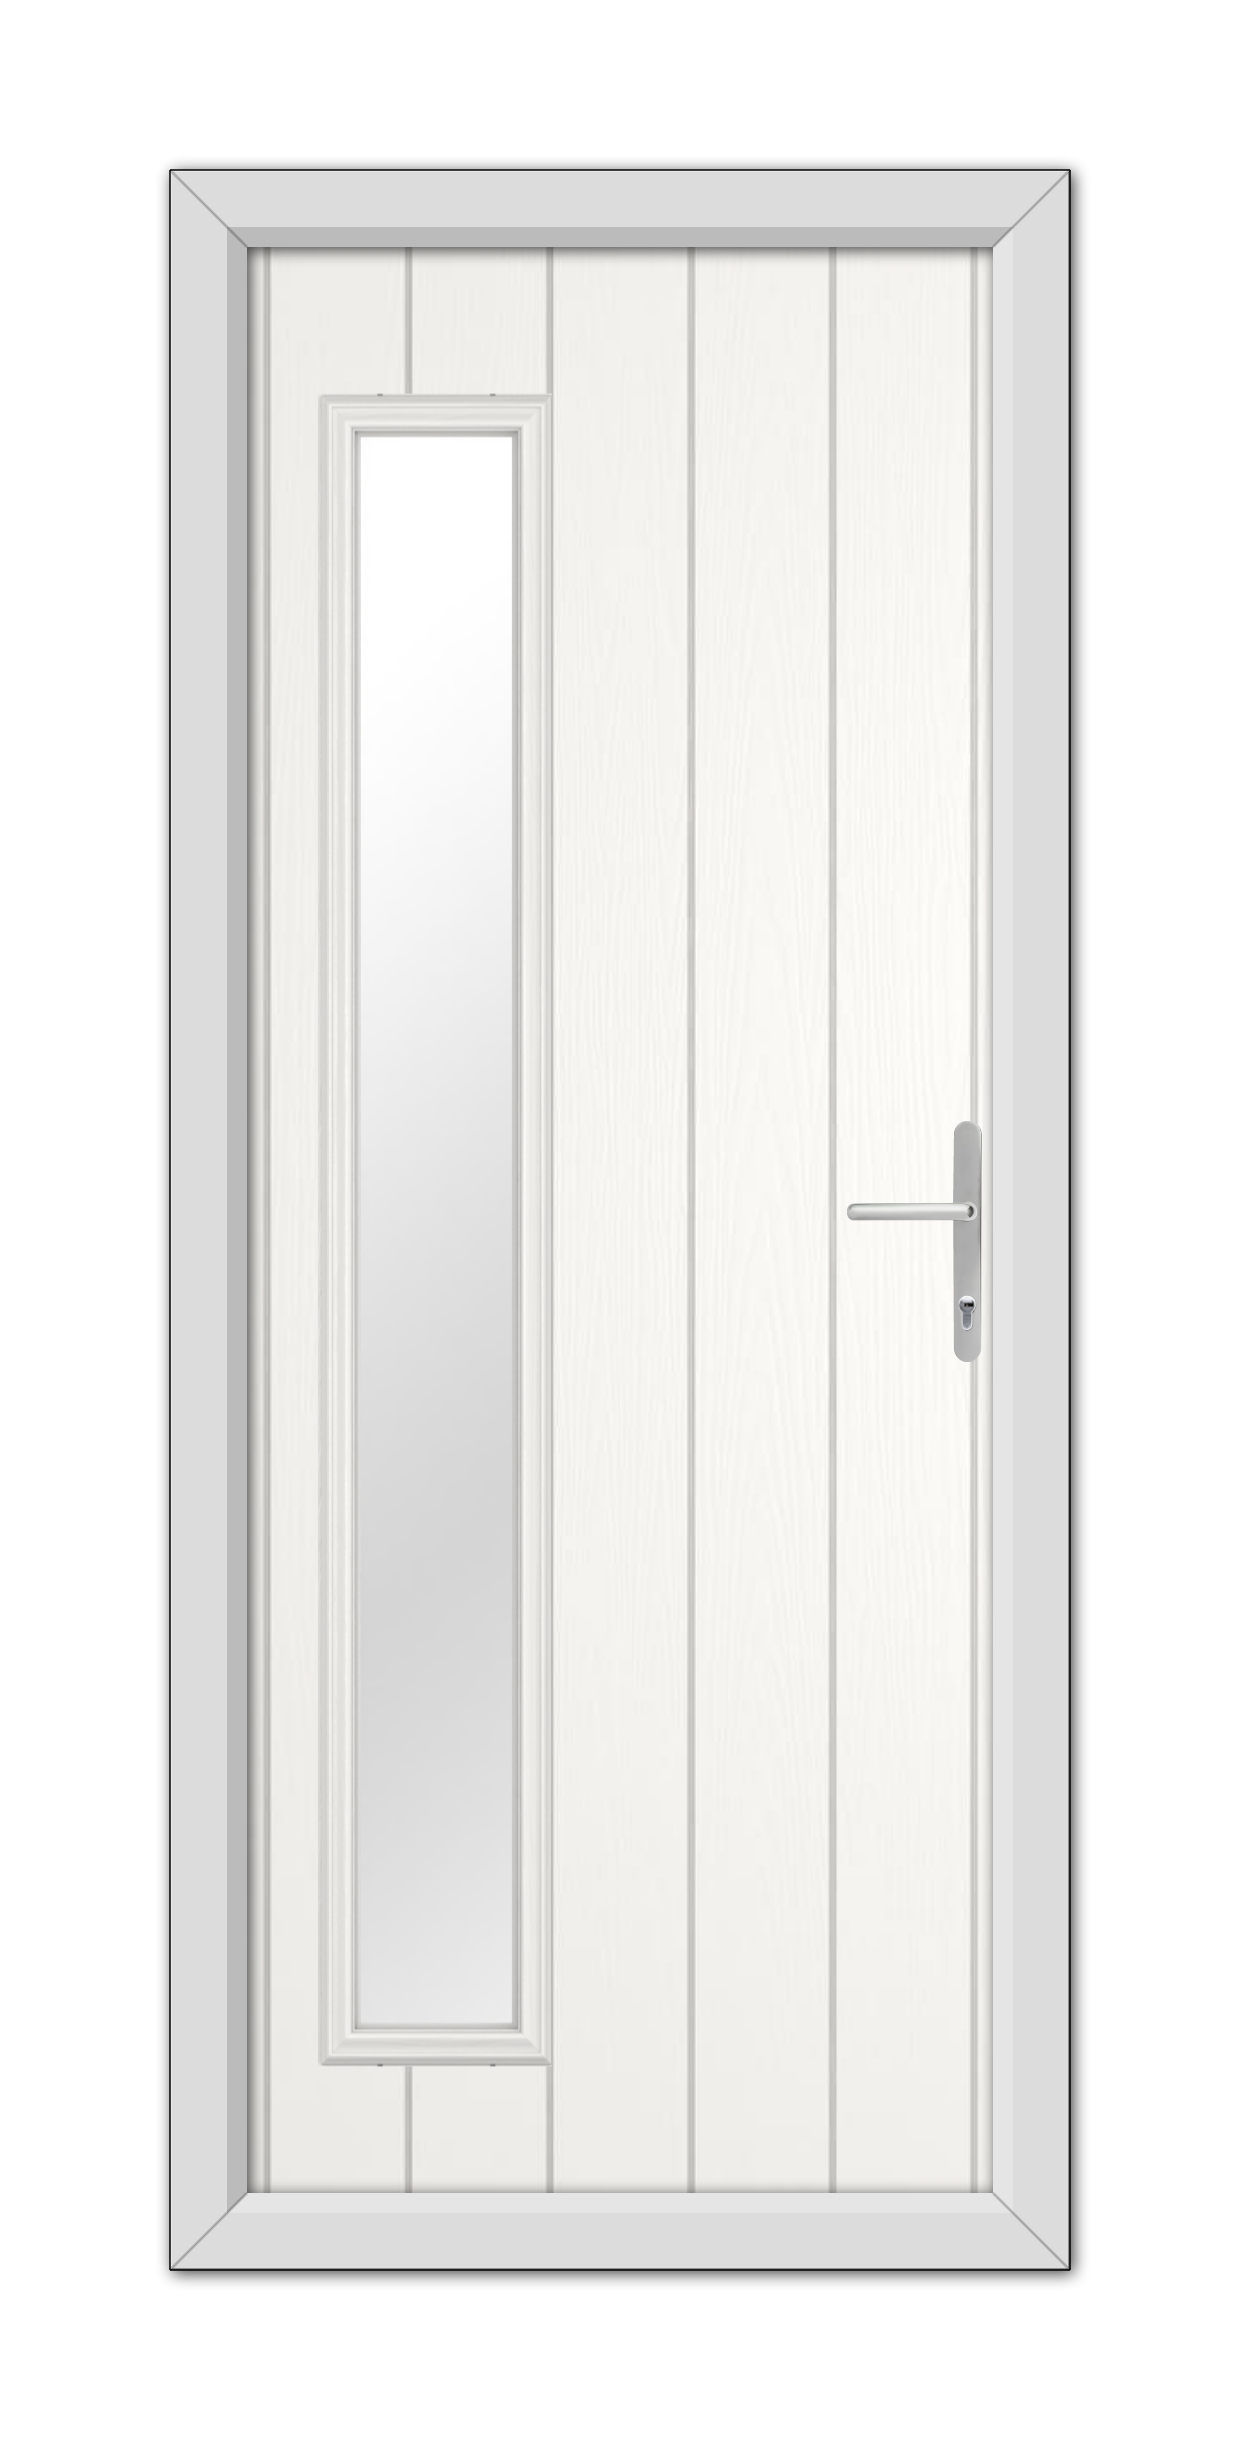 A White Sutherland Composite Door 48mm Timber Core with a vertical handle and a narrow vertical window on the left side, set in a grey frame.